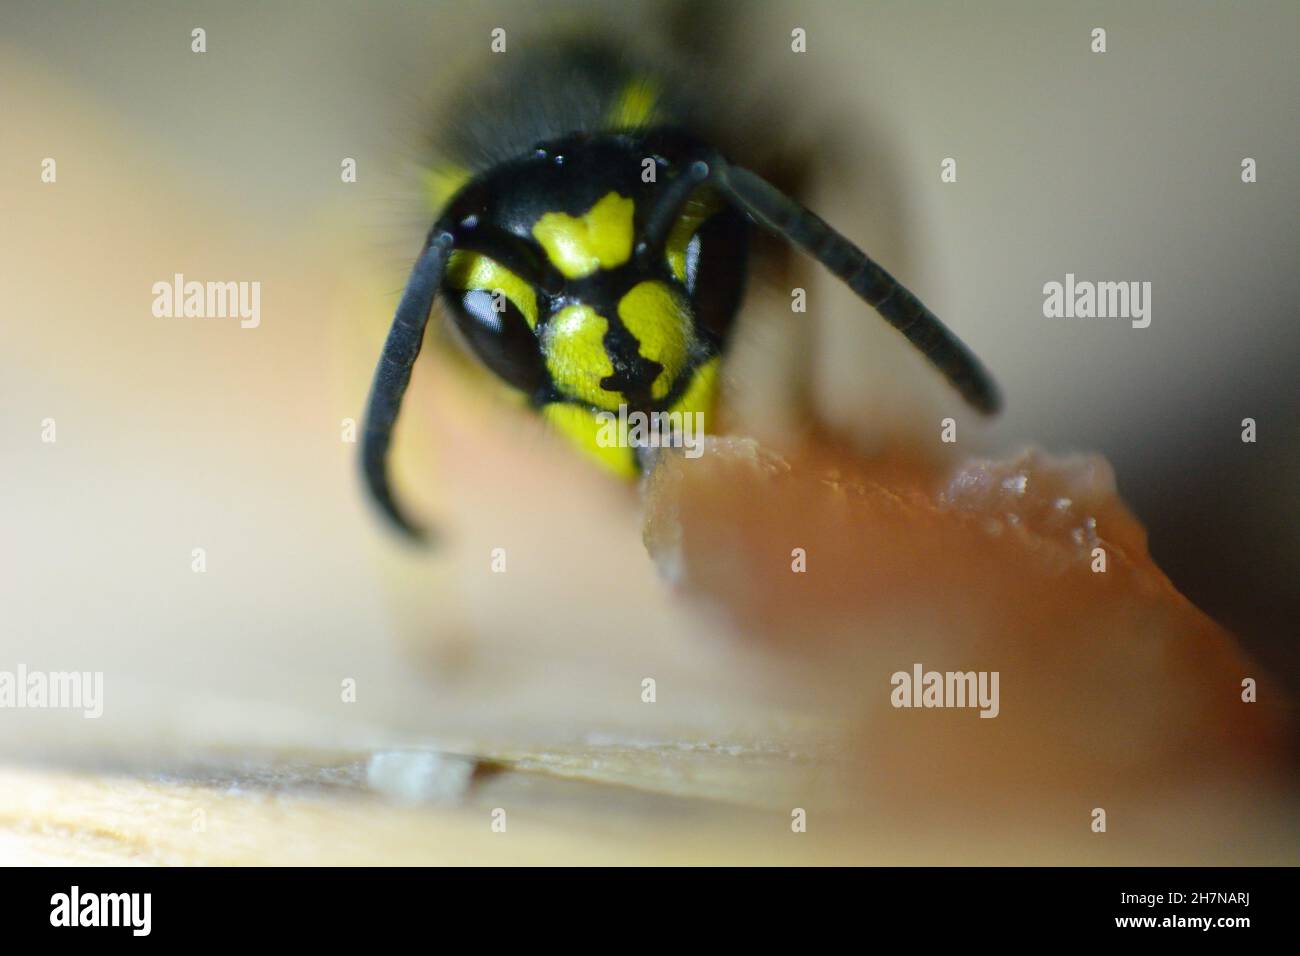 Wasp Eating Ham in Close Up. Stock Photo